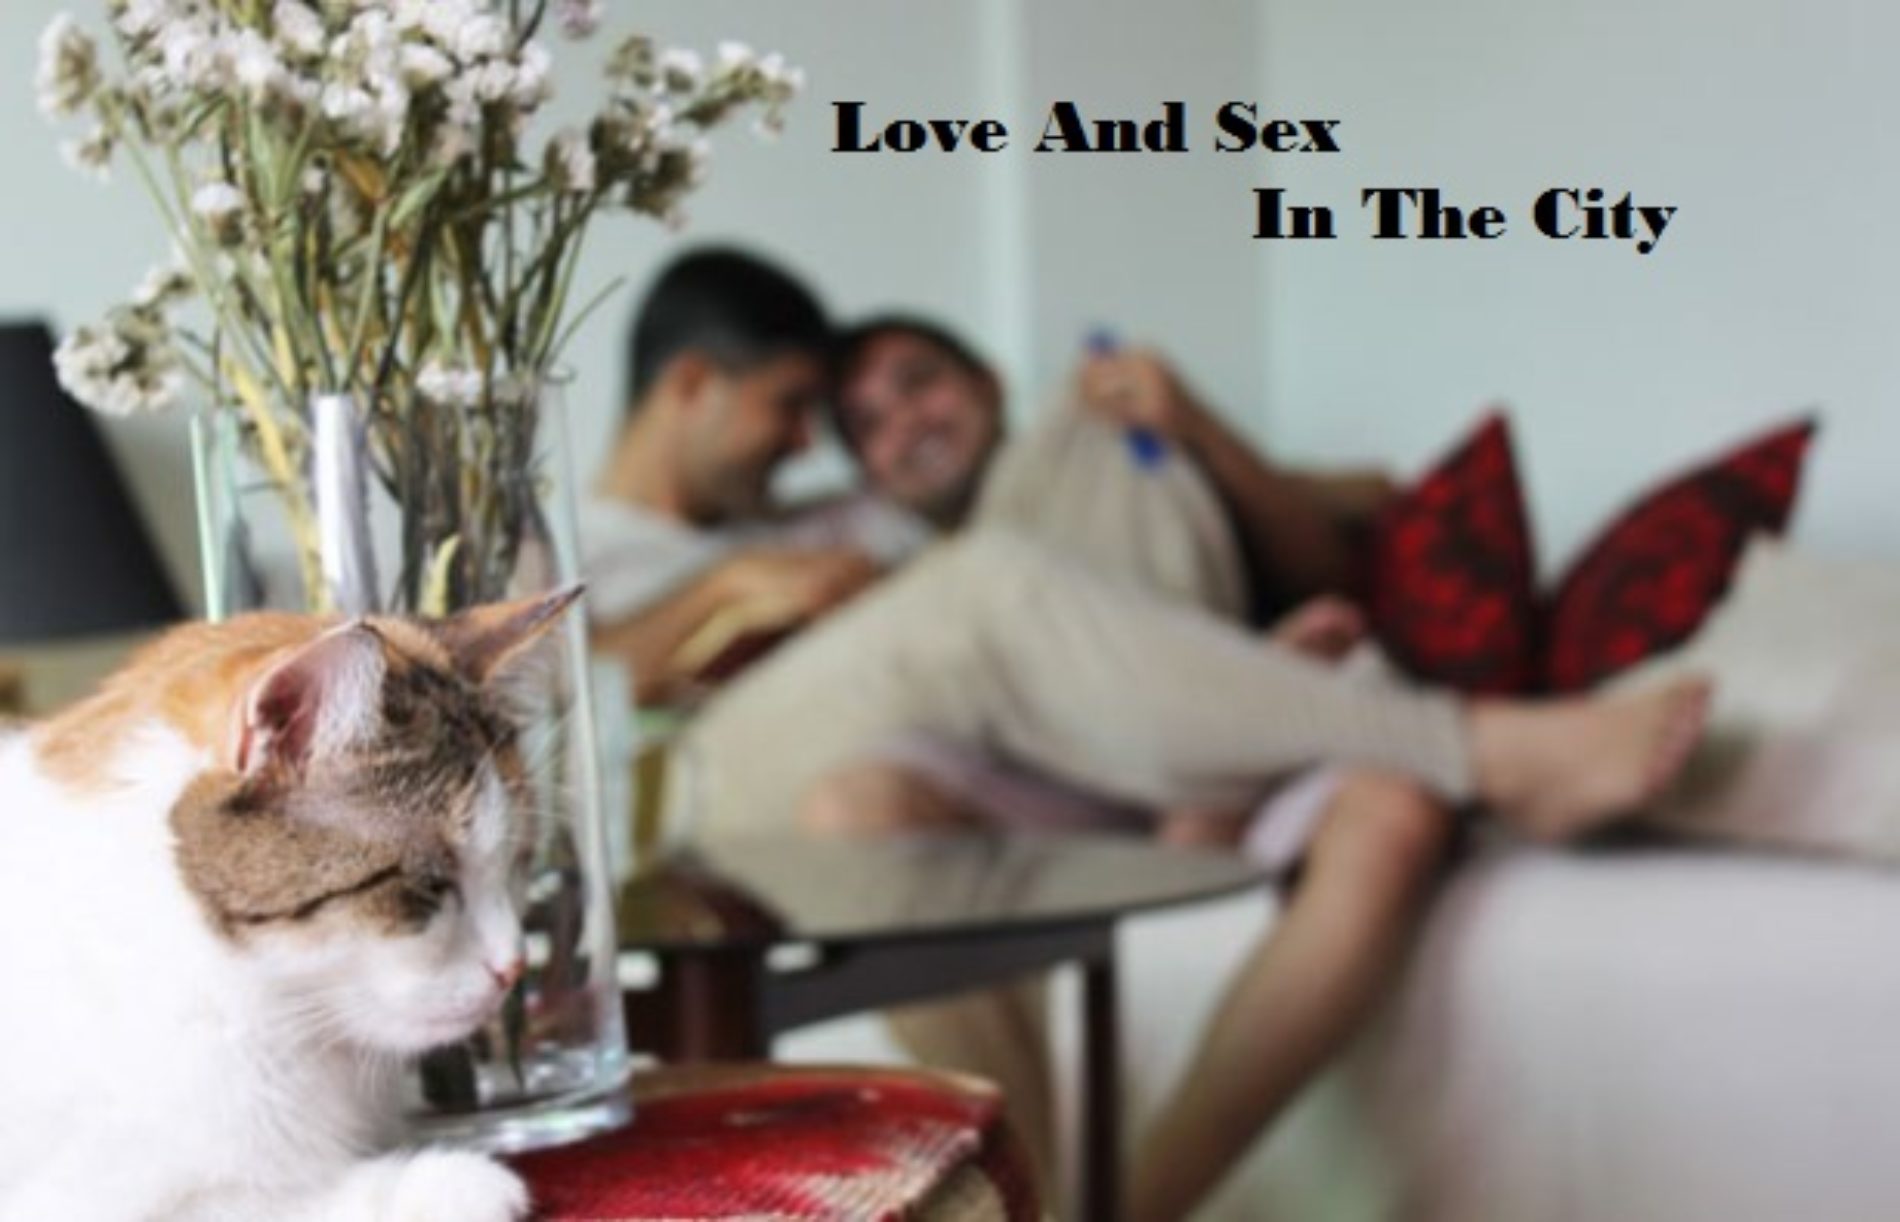 LOVE AND SEX IN THE CITY (Episode 40)